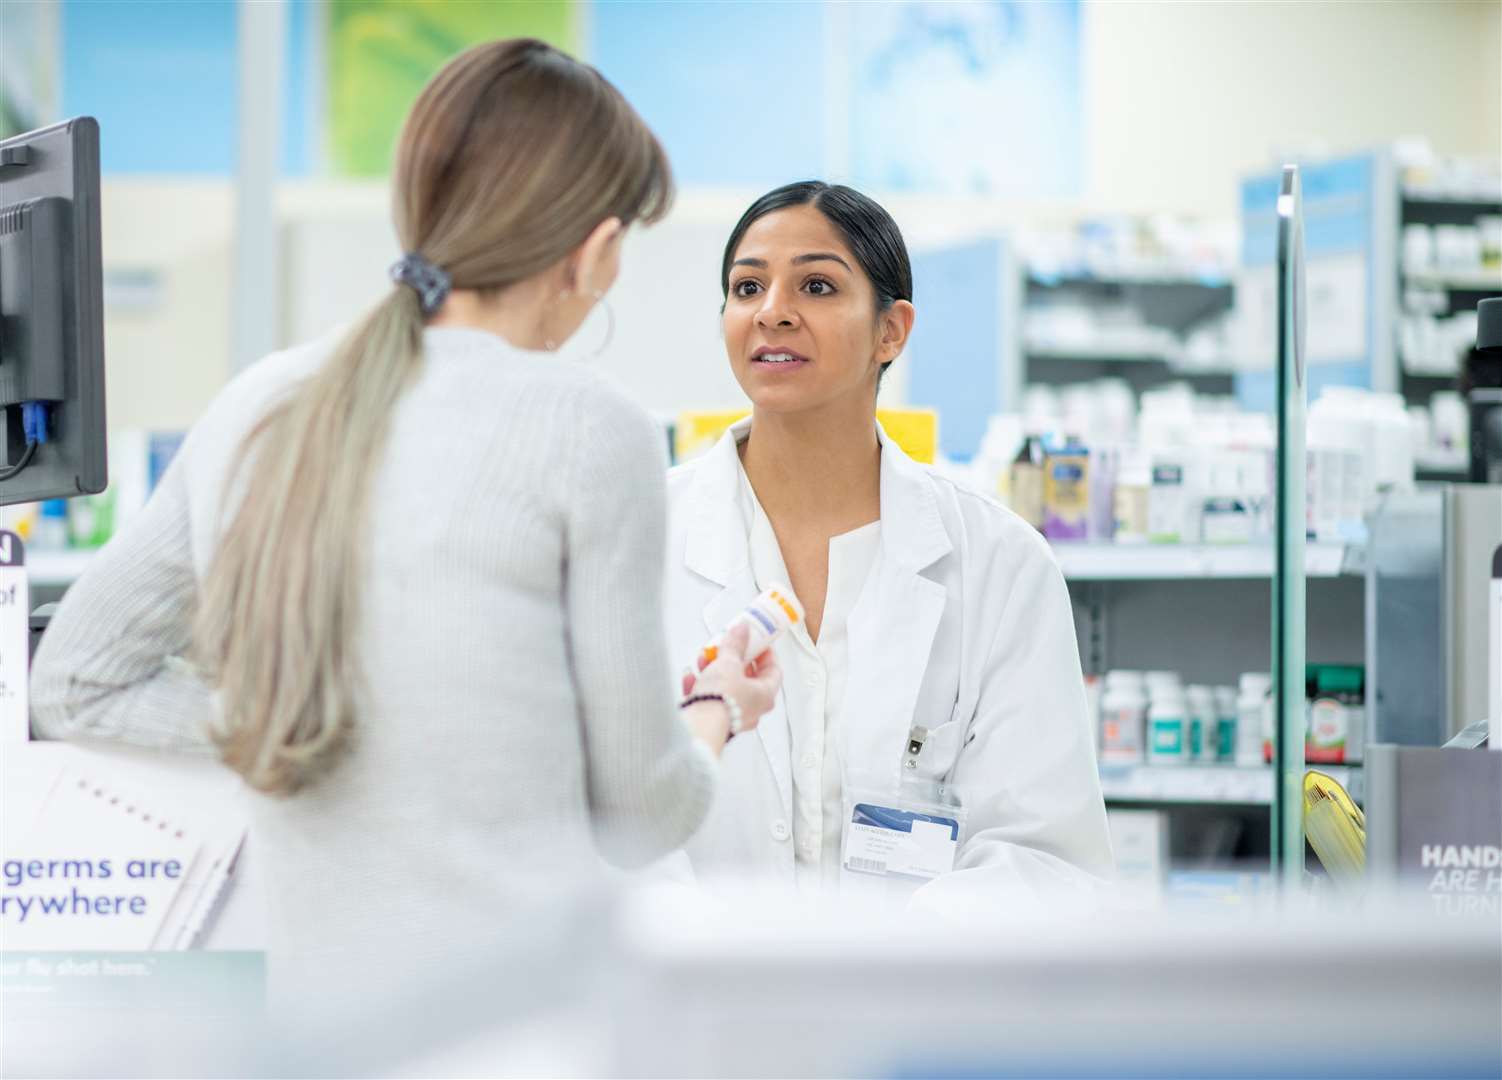 Millions more appointments at pharmacists are now available. Image: iStock.